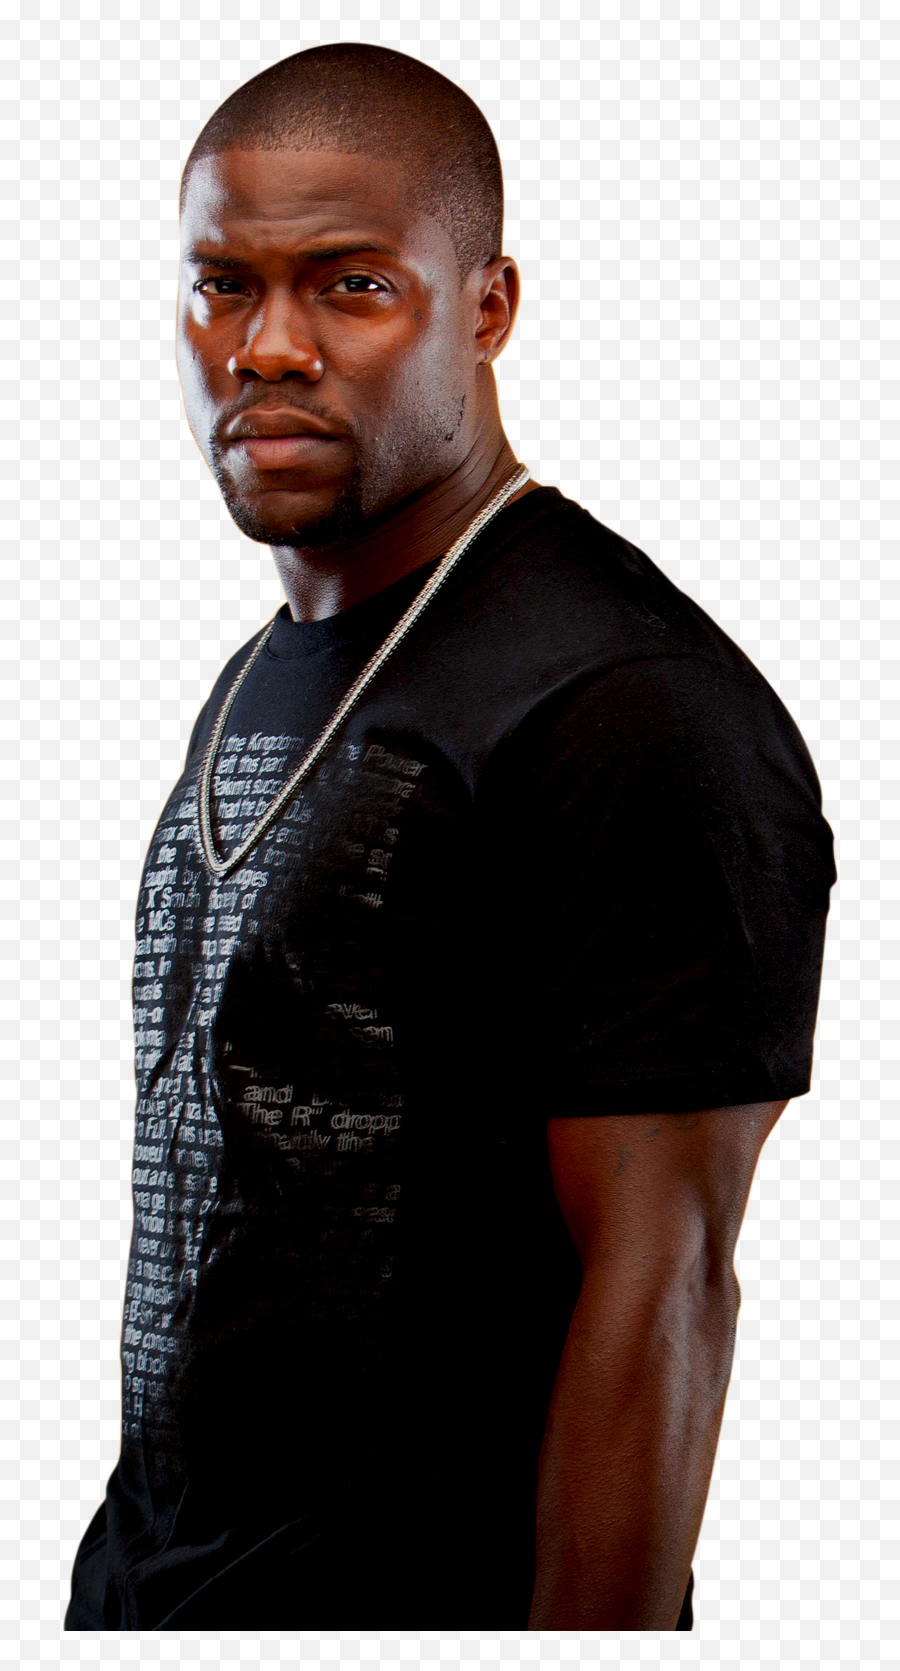 Png Transparent Kevin Hart - Kevin Hart,Kevin Hart Png